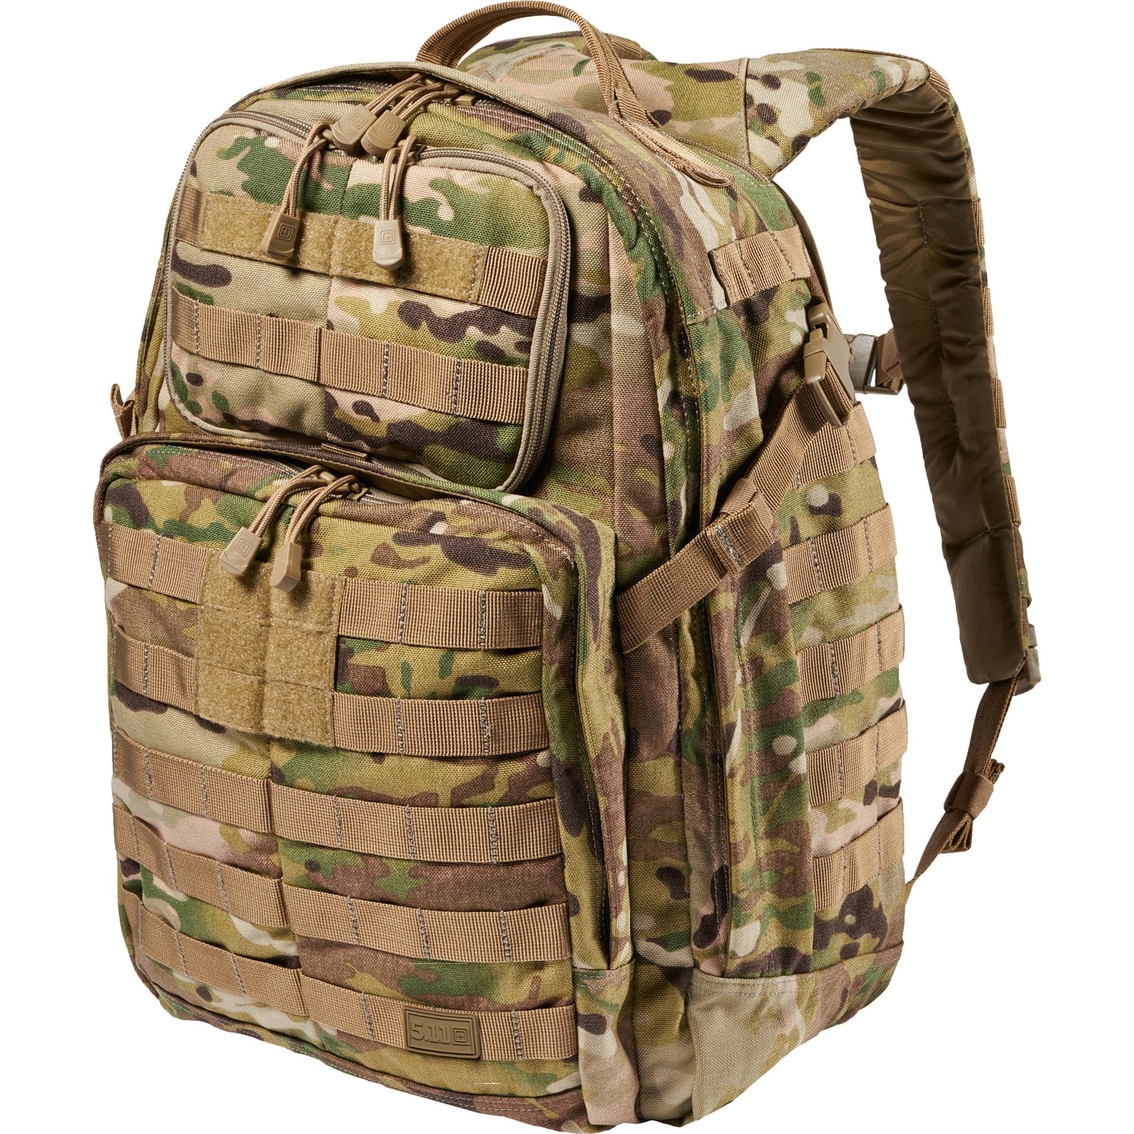 5.11 RUSH 24 2.0 Backpack - Image 4 of 10